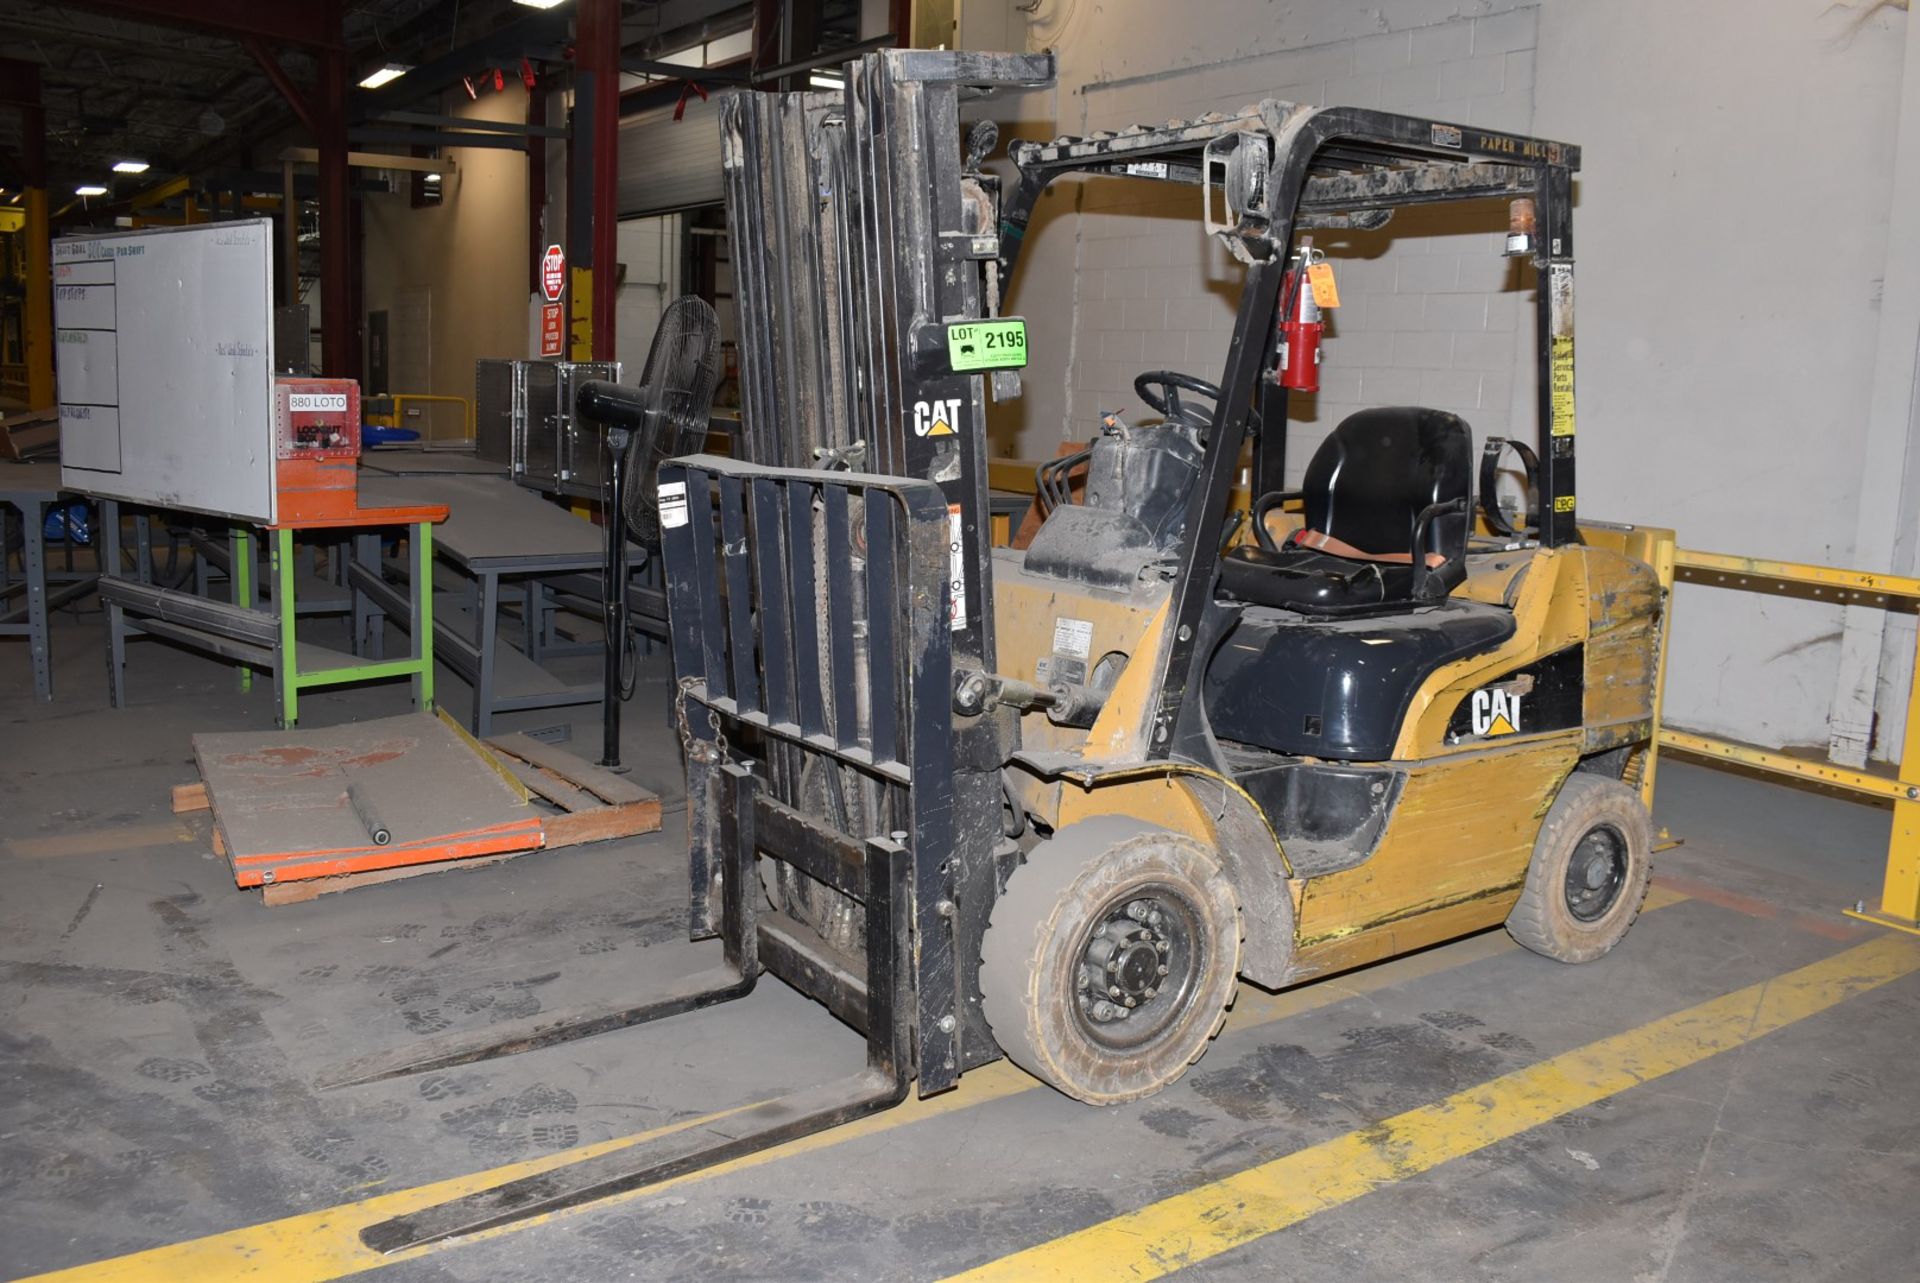 CATERPILLAR P5000 4,600 LBS. CAPACITY LPG FORKLIFT WITH 170" MAX VERTICAL REACH, 3-STAGE HIGH